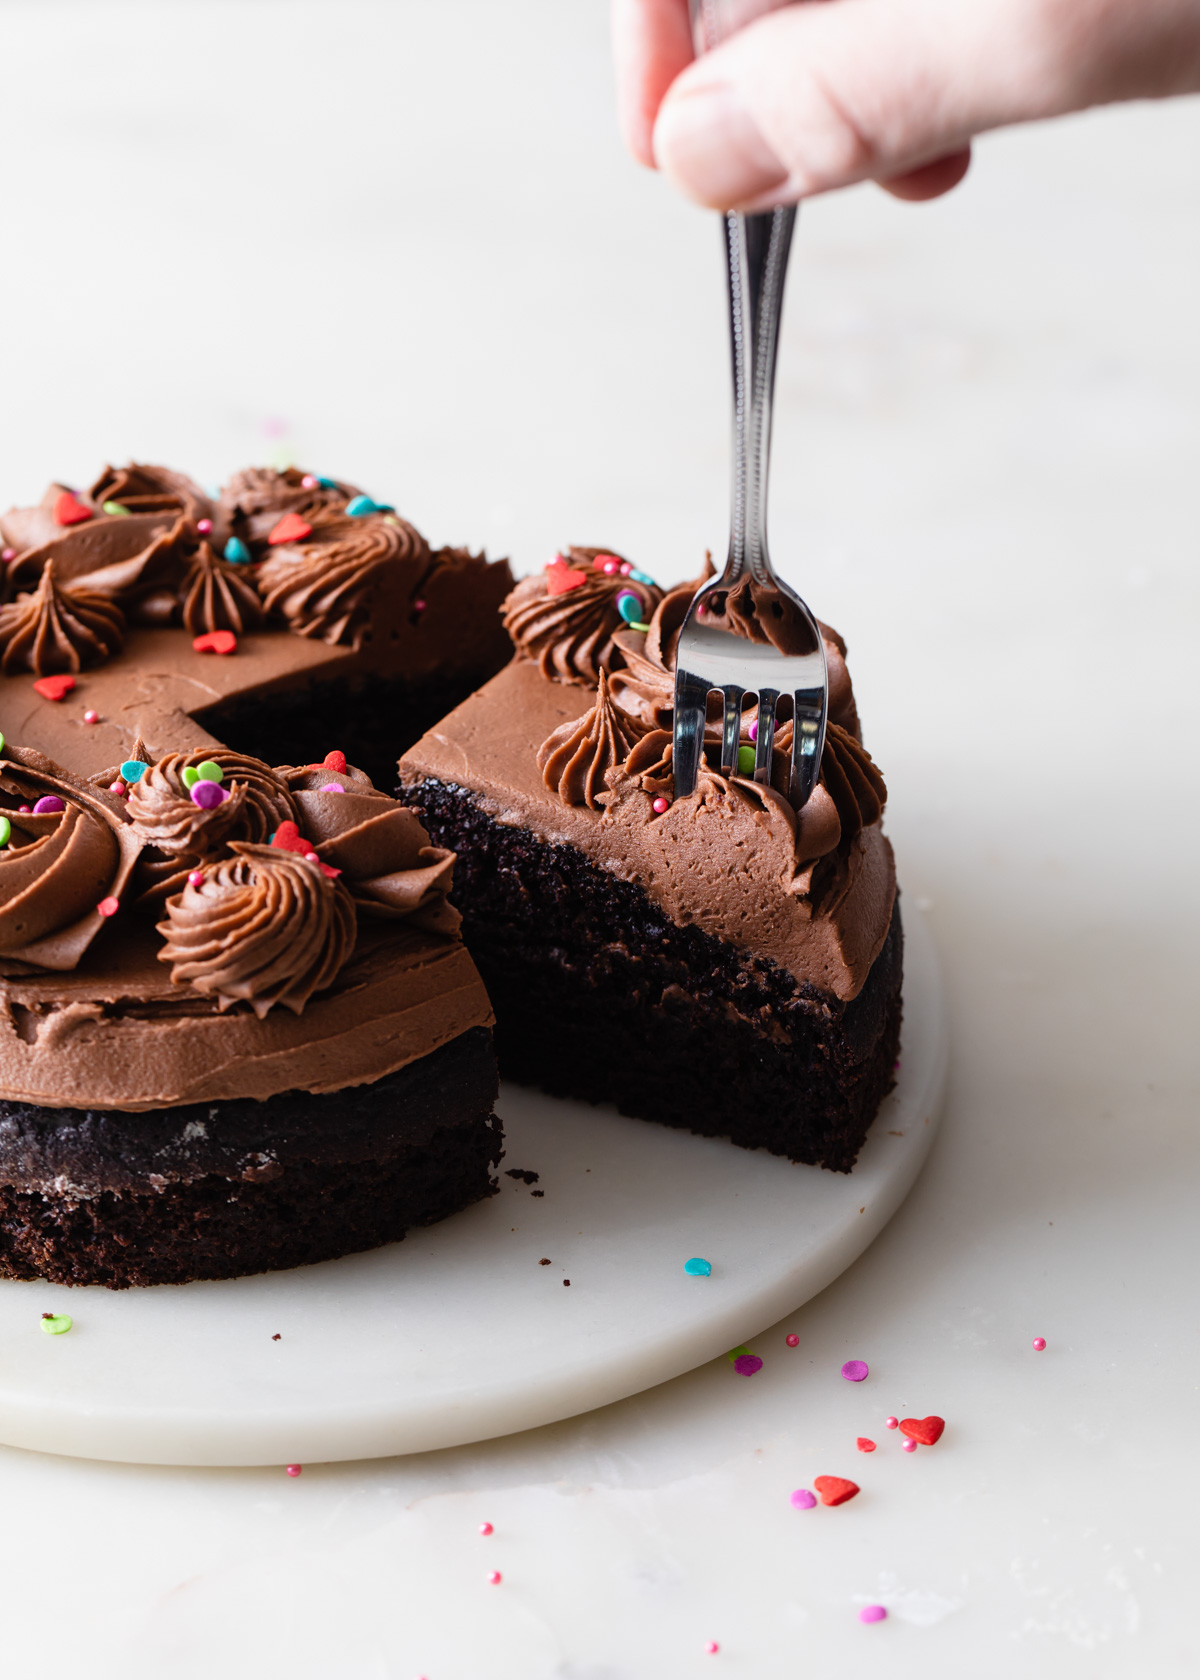 A slice of mini chocolate cake for two with fudge frosting and sprinkles being eaten with a fork